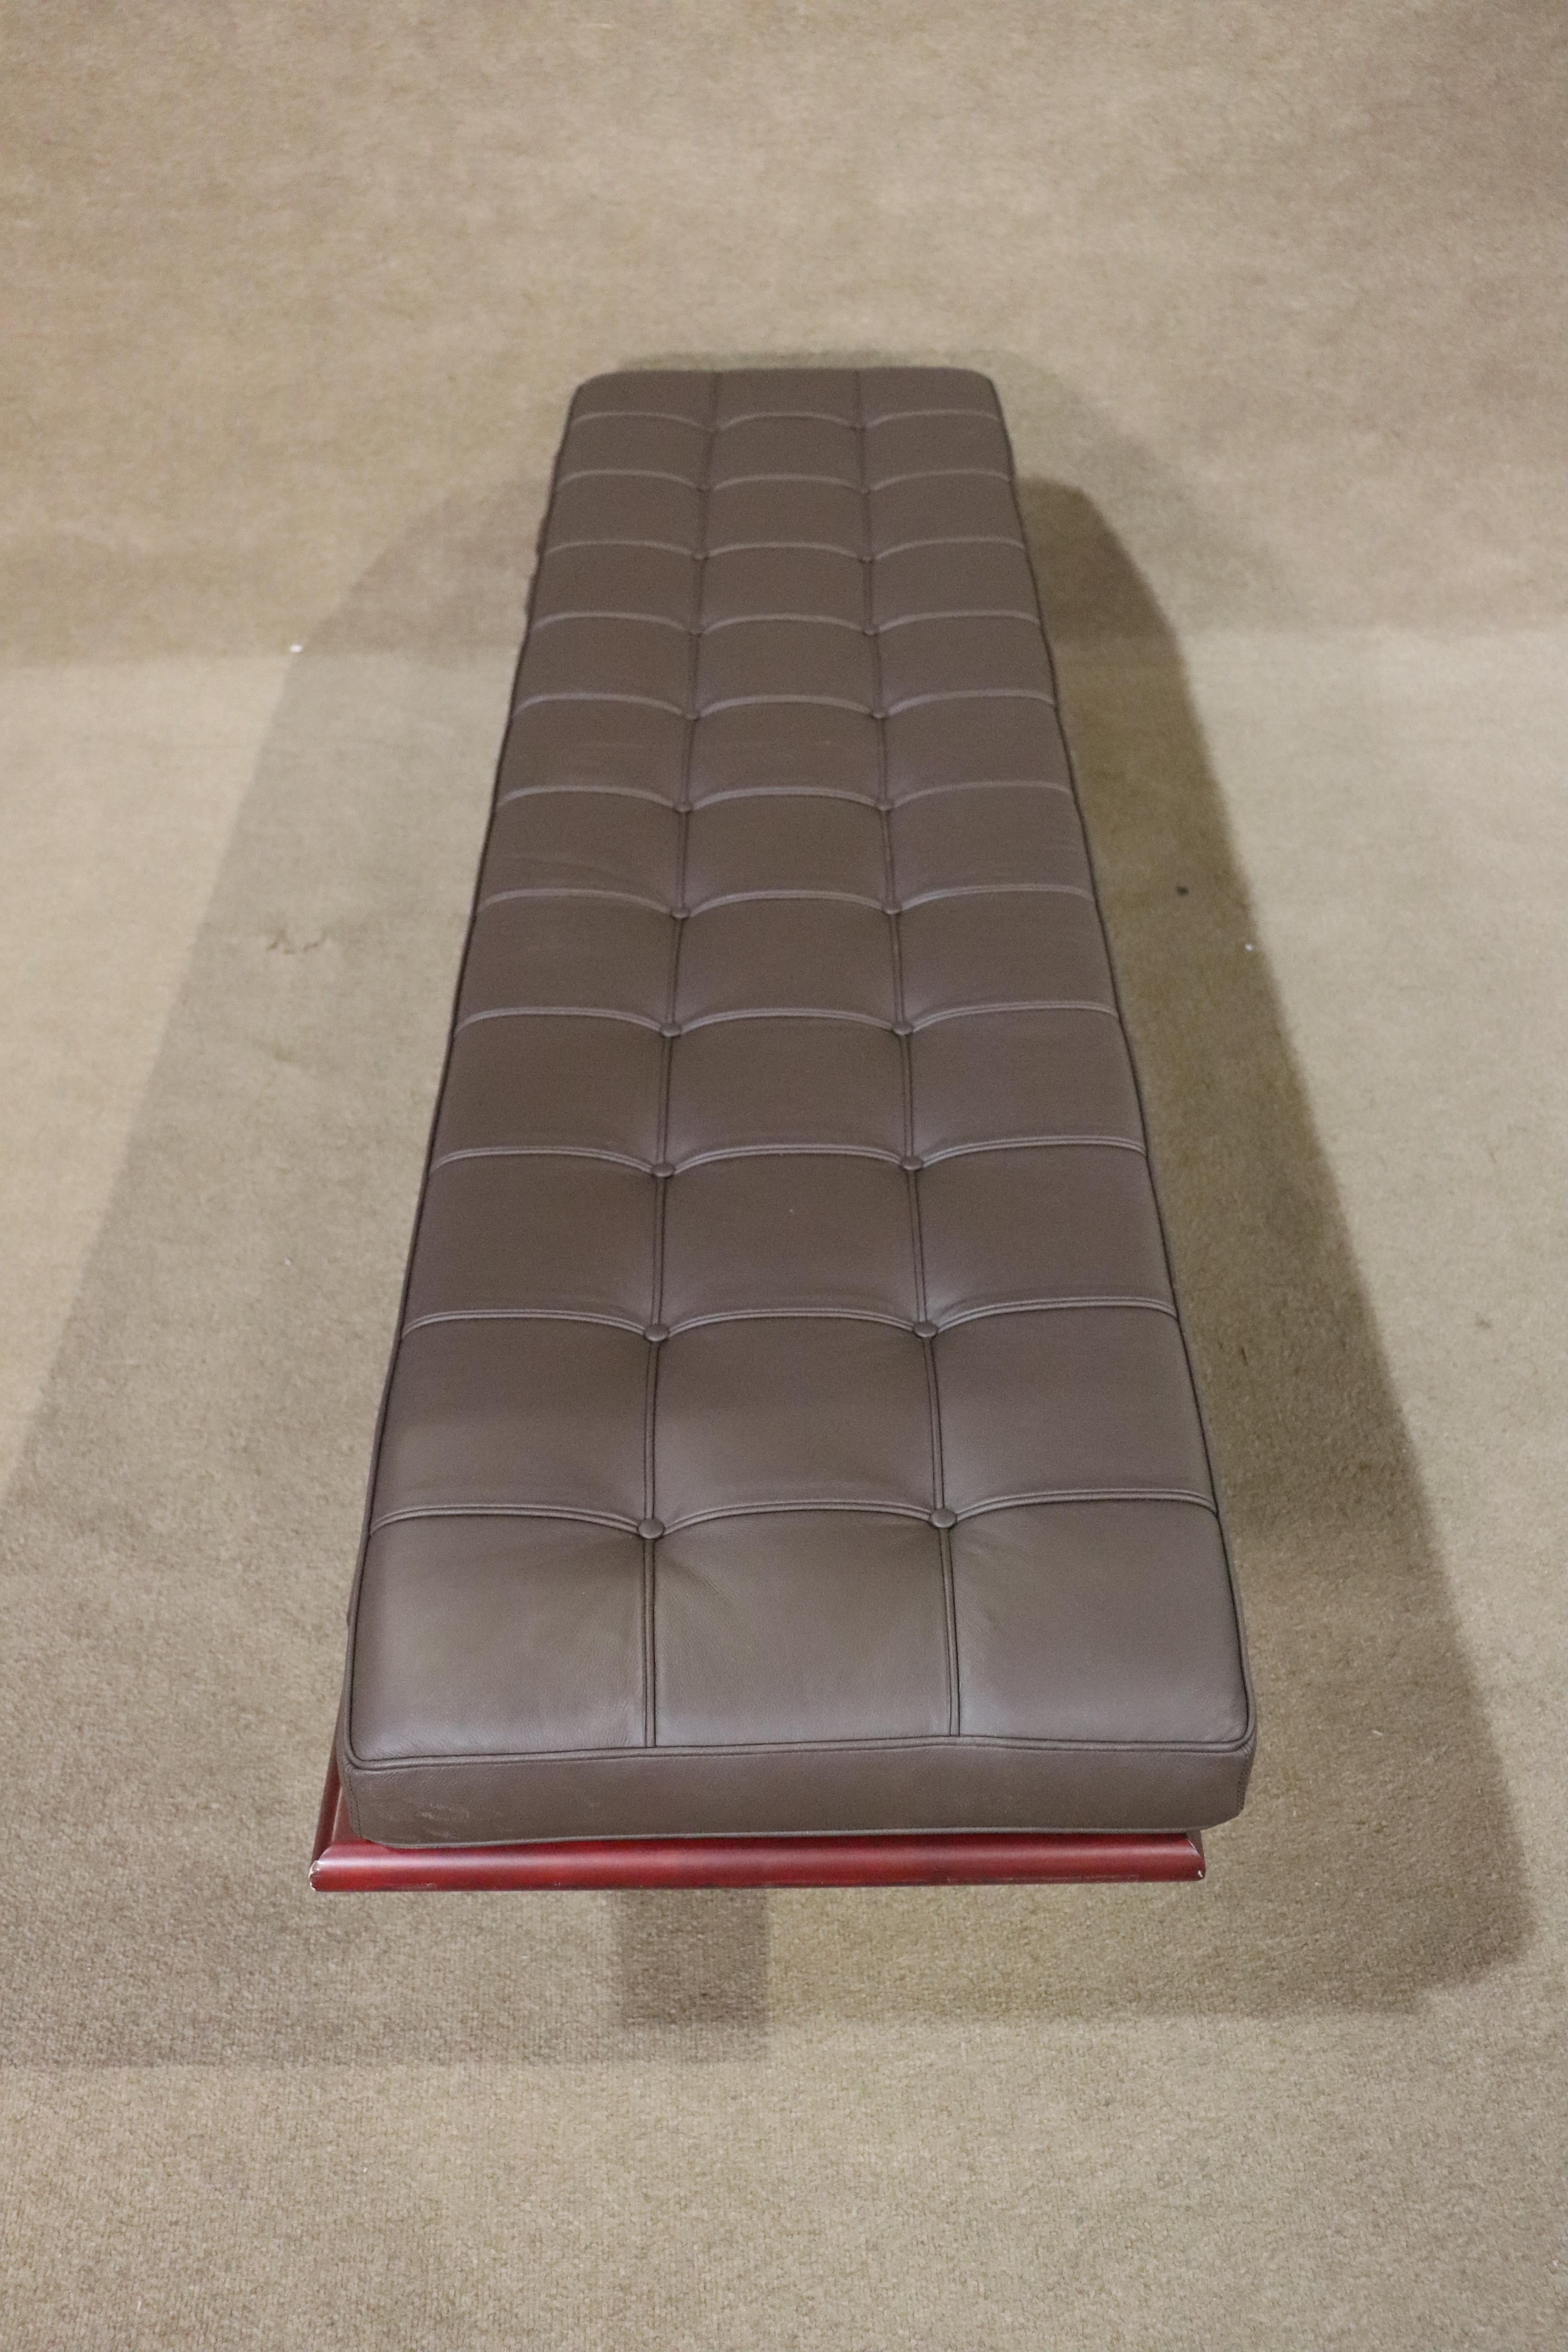 Six foot long tufted bench on polished chrome base. Designed in the style of Mies van der Rohe's Barcelona bench.
Please confirm location NY or NJ